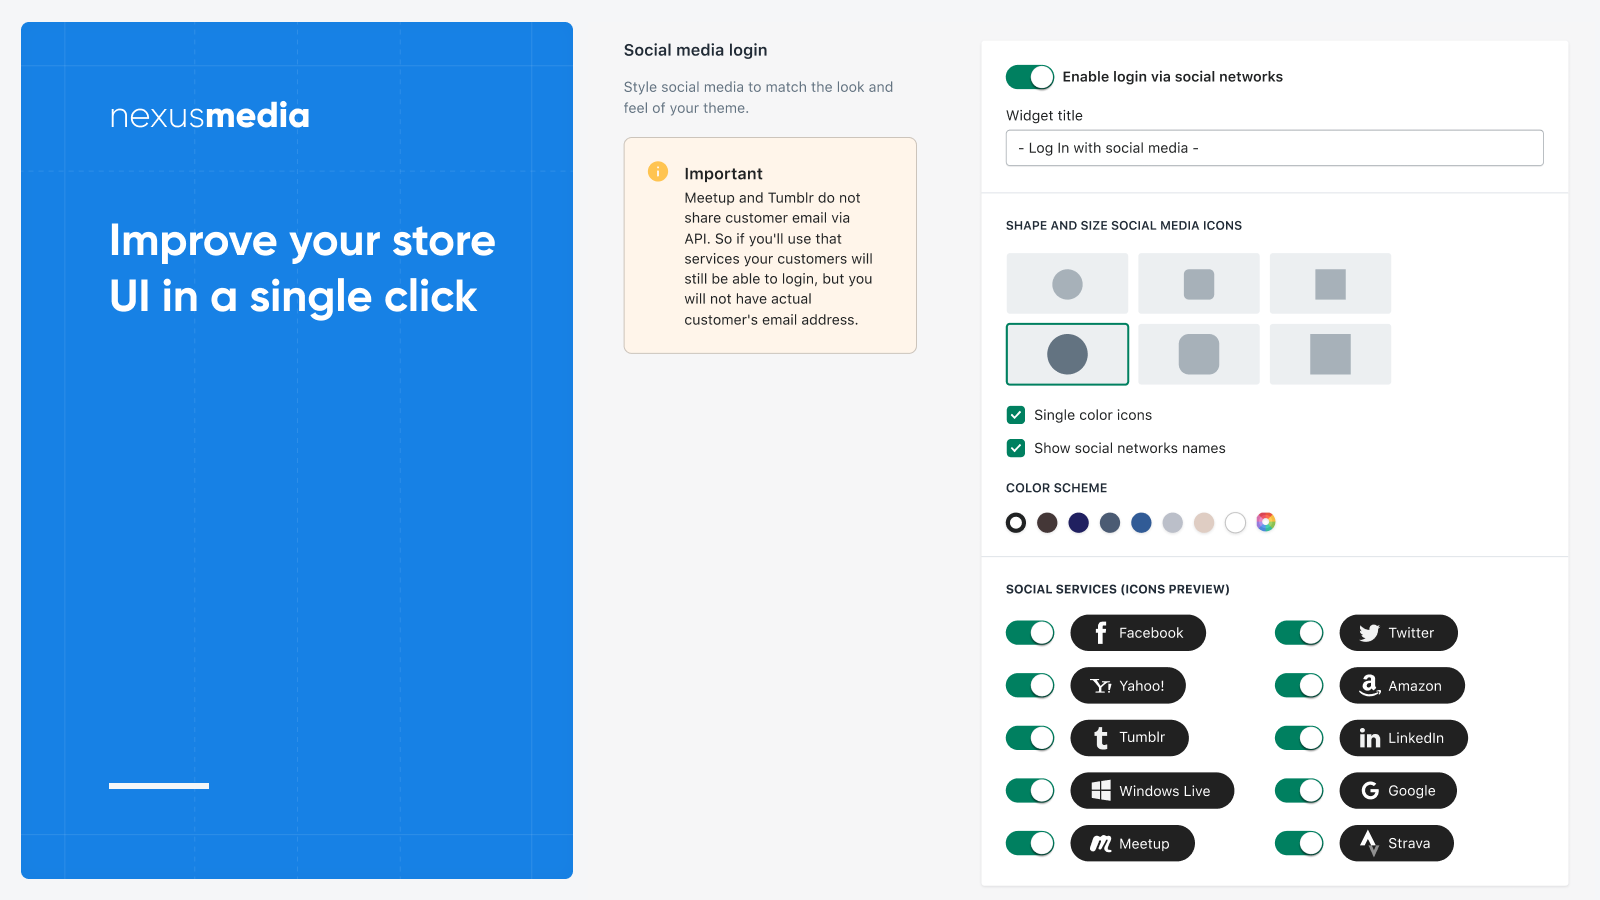 Improve your store UI in a single click